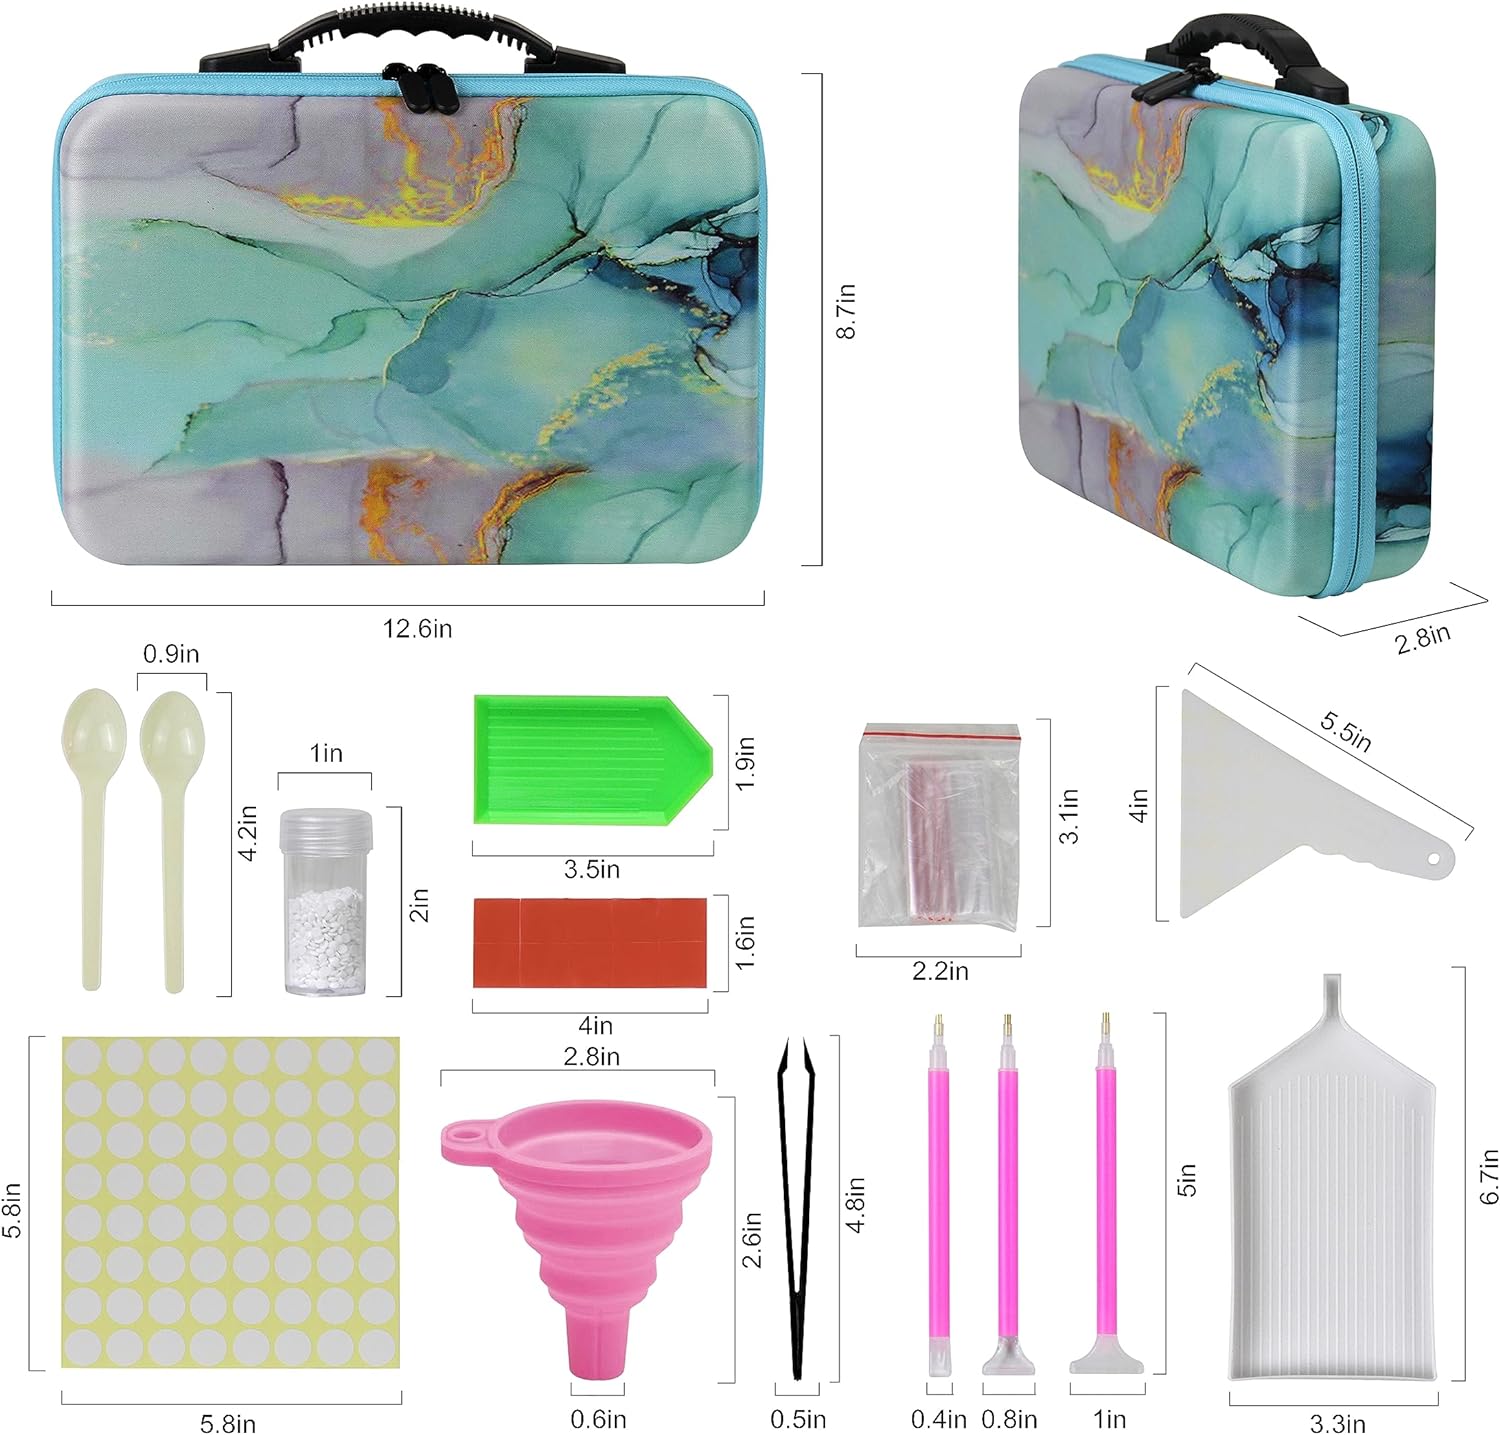 60 Slots Diamond Painting Storage Container,Accessory Kit with Tools